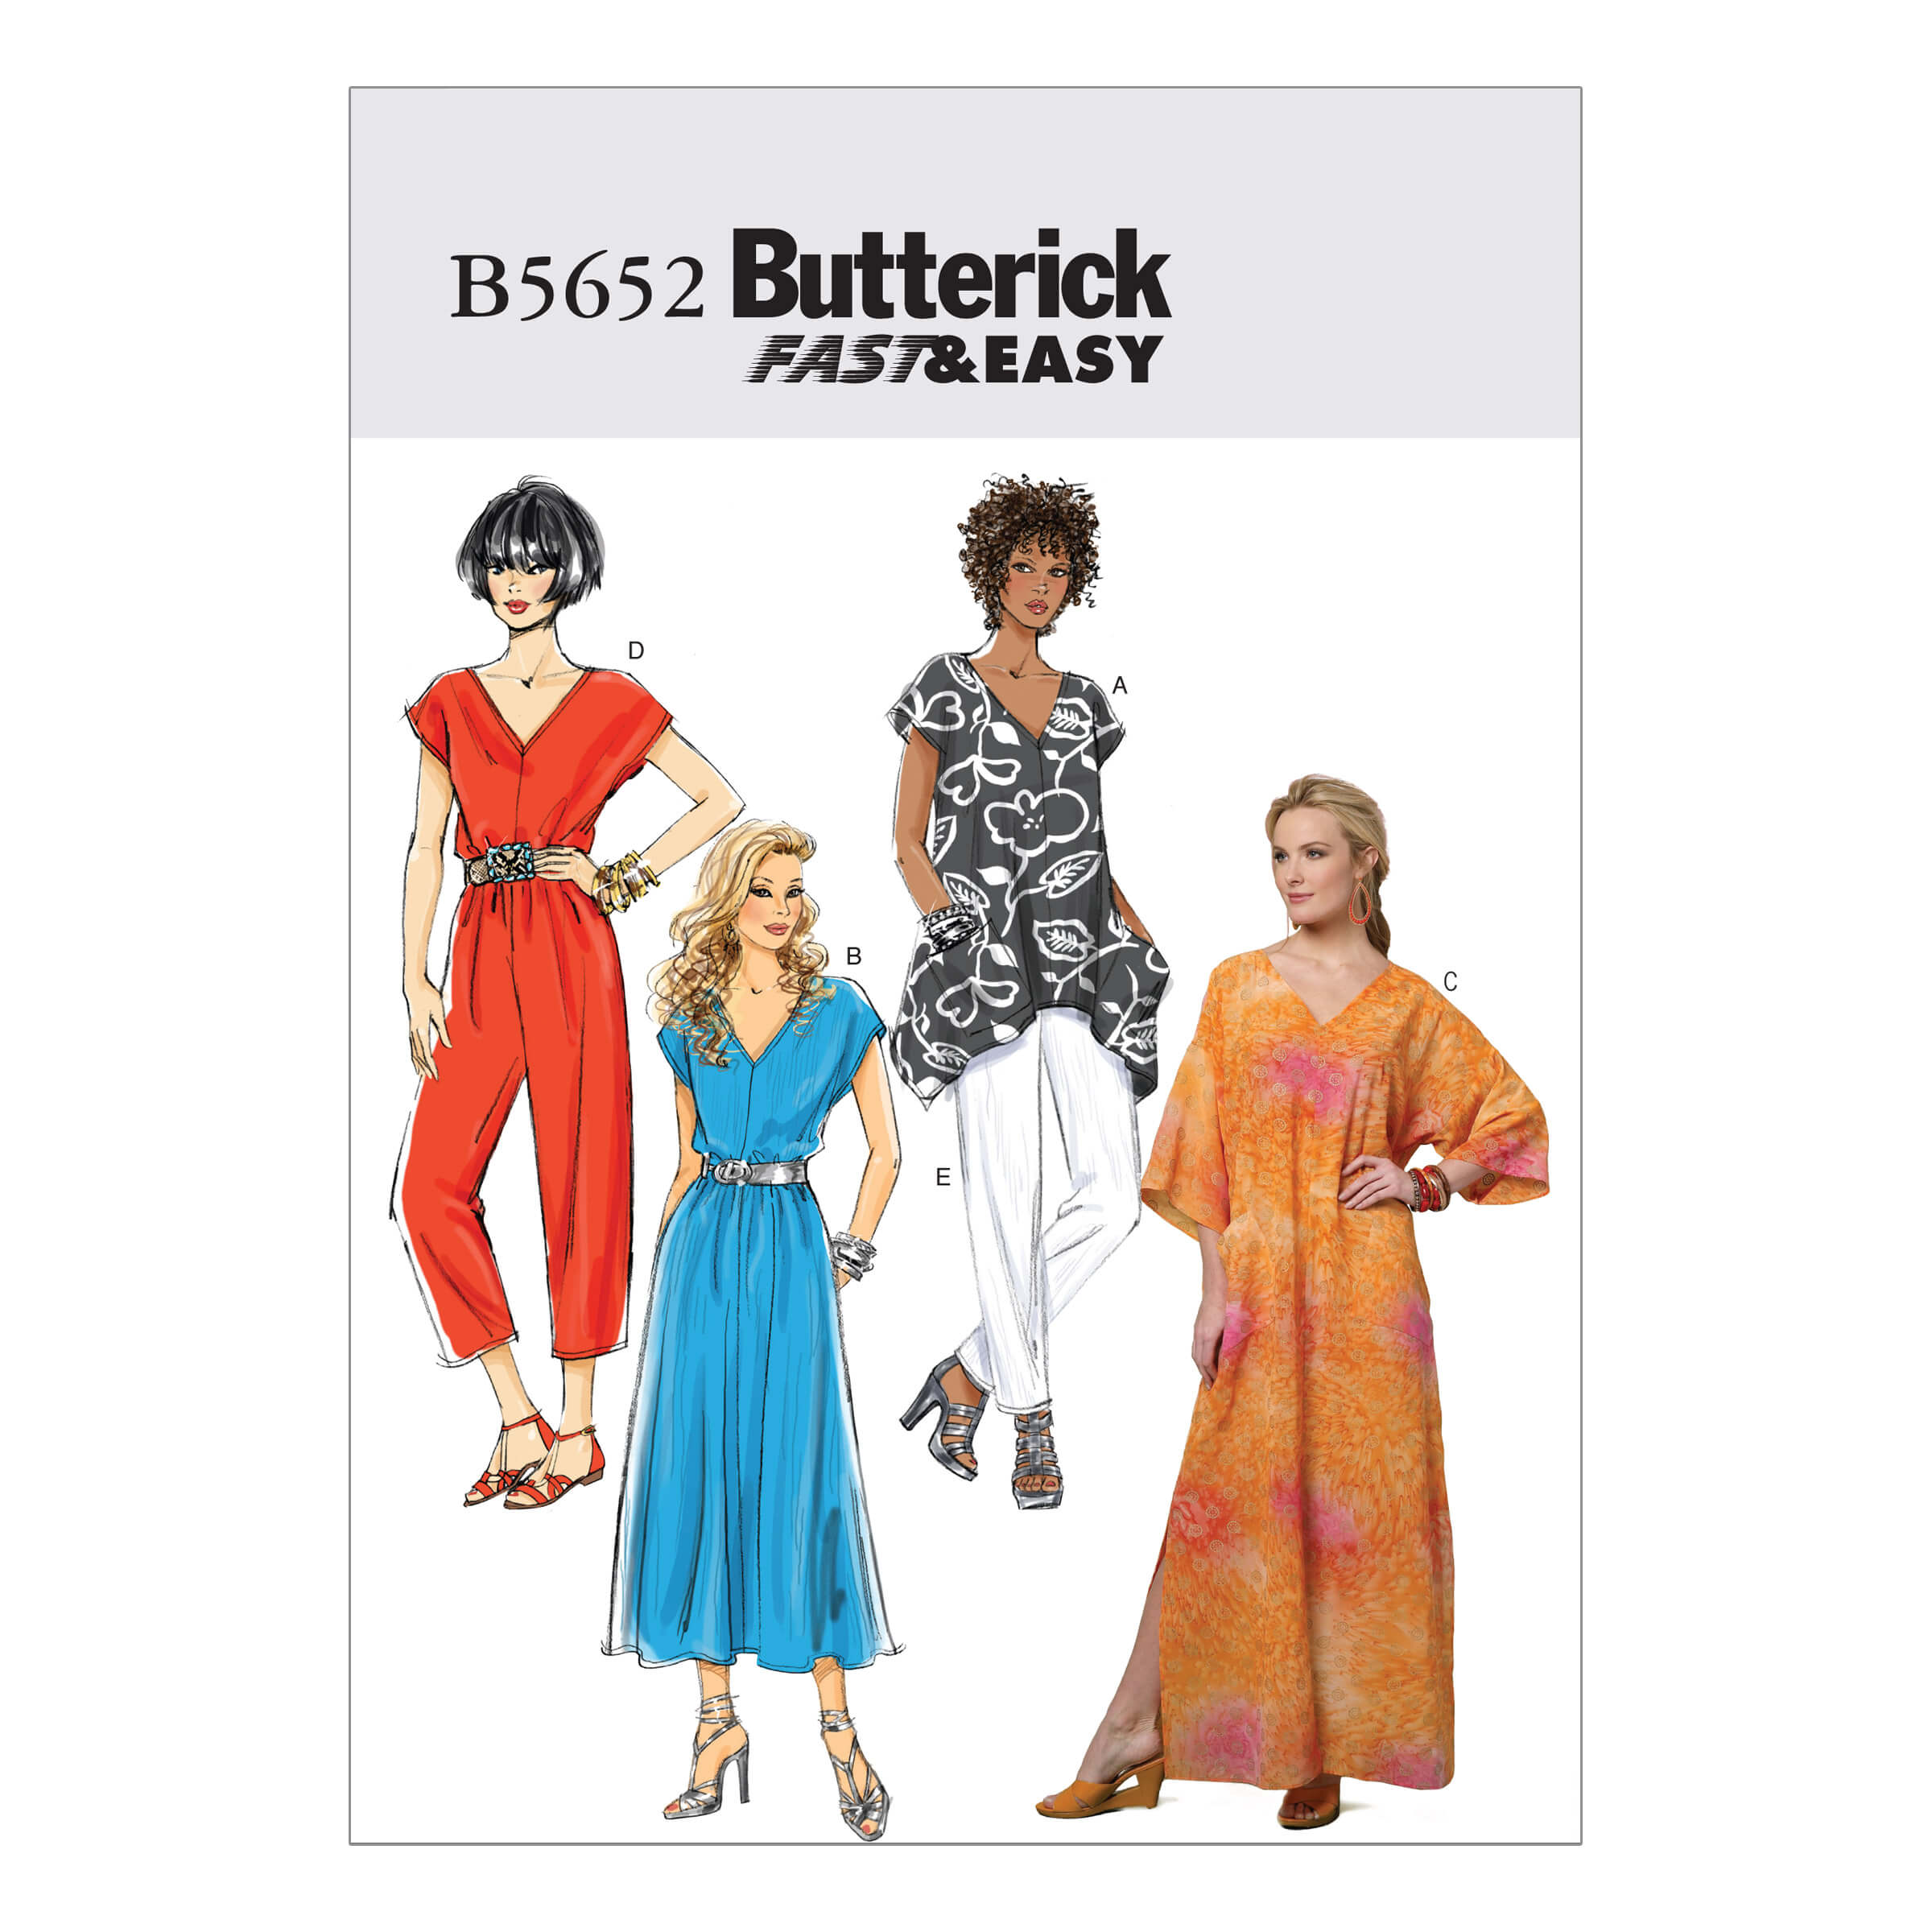 Butterick Sewing Pattern B5652 Misses' Top, Dress, Caftan, Jumpsuit and Pants